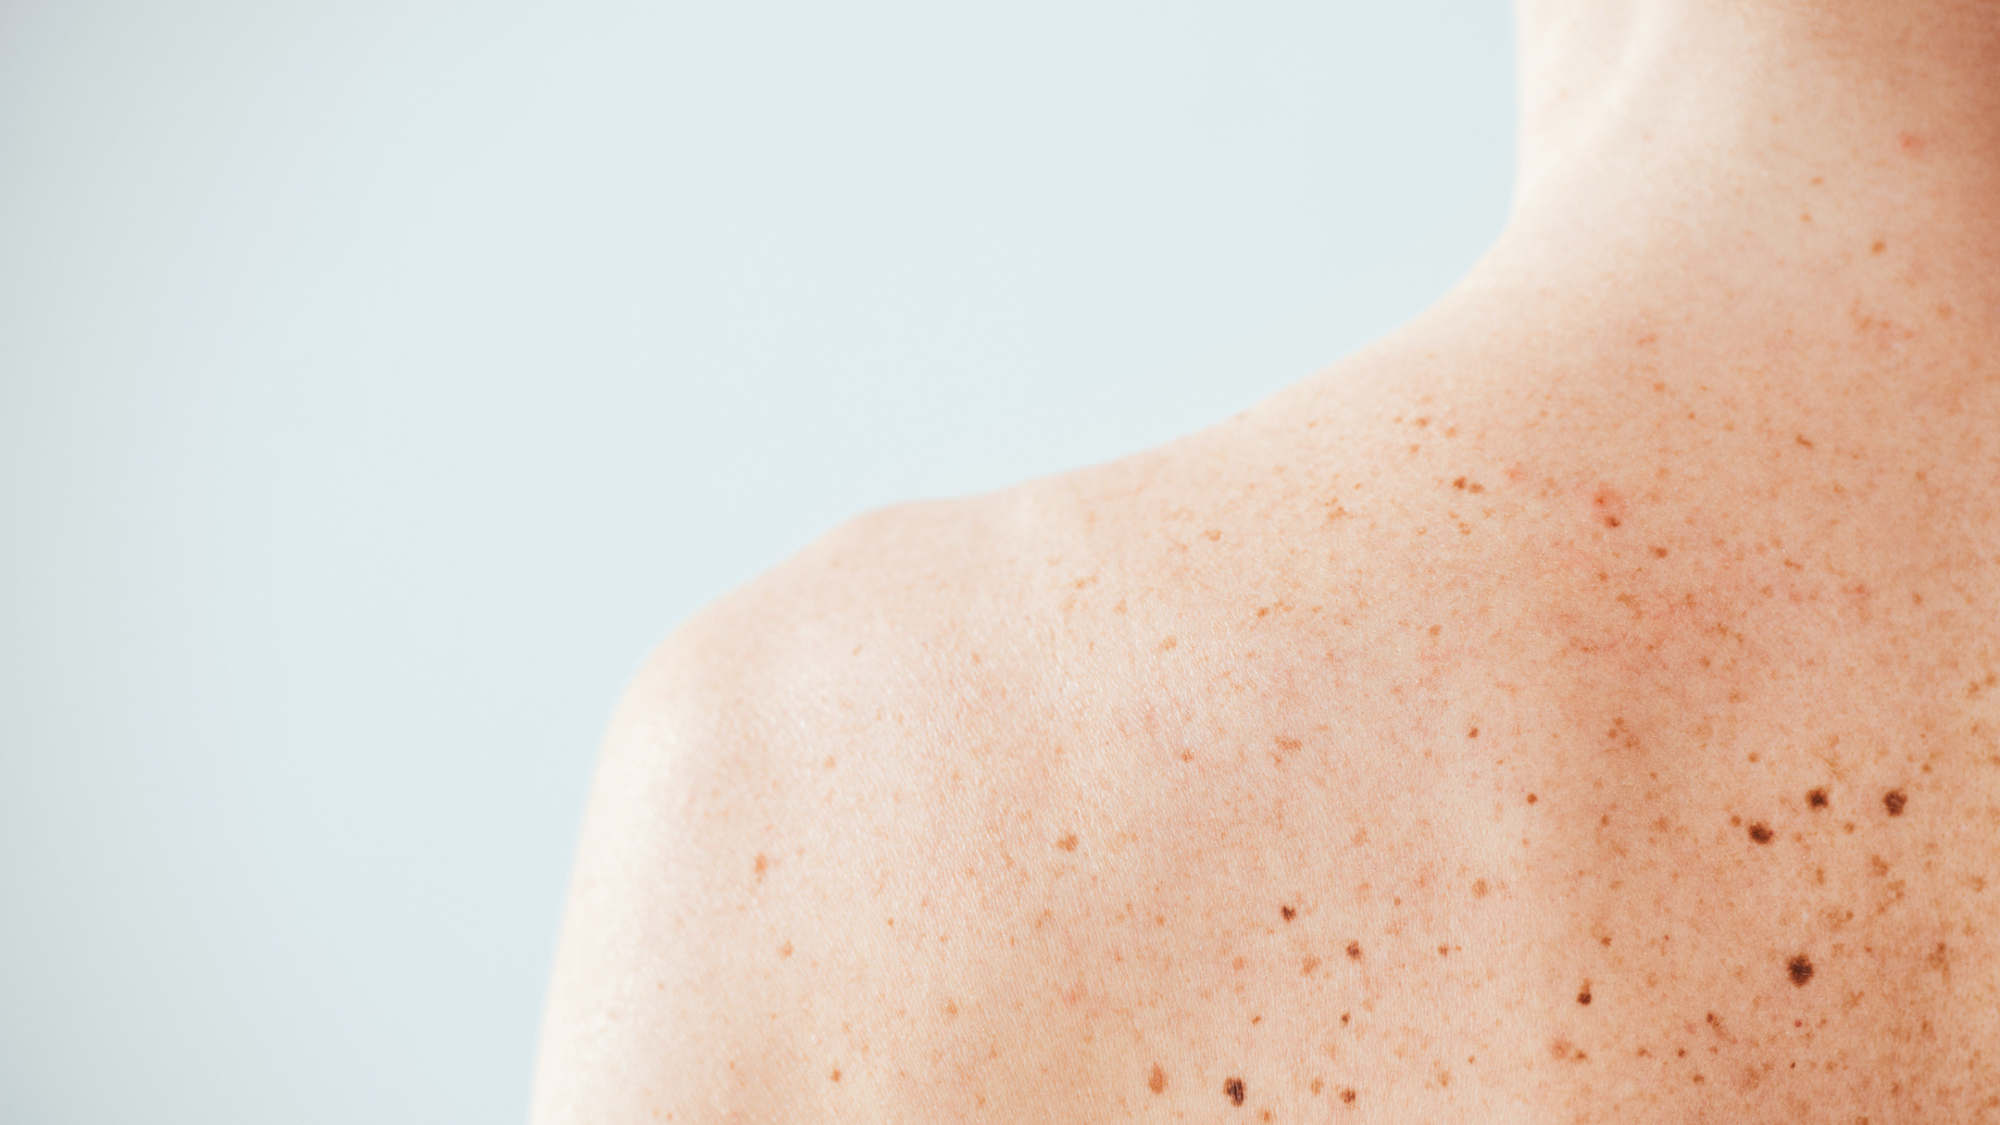 How many moles is deemed a high risk of skin cancer or melanoma?